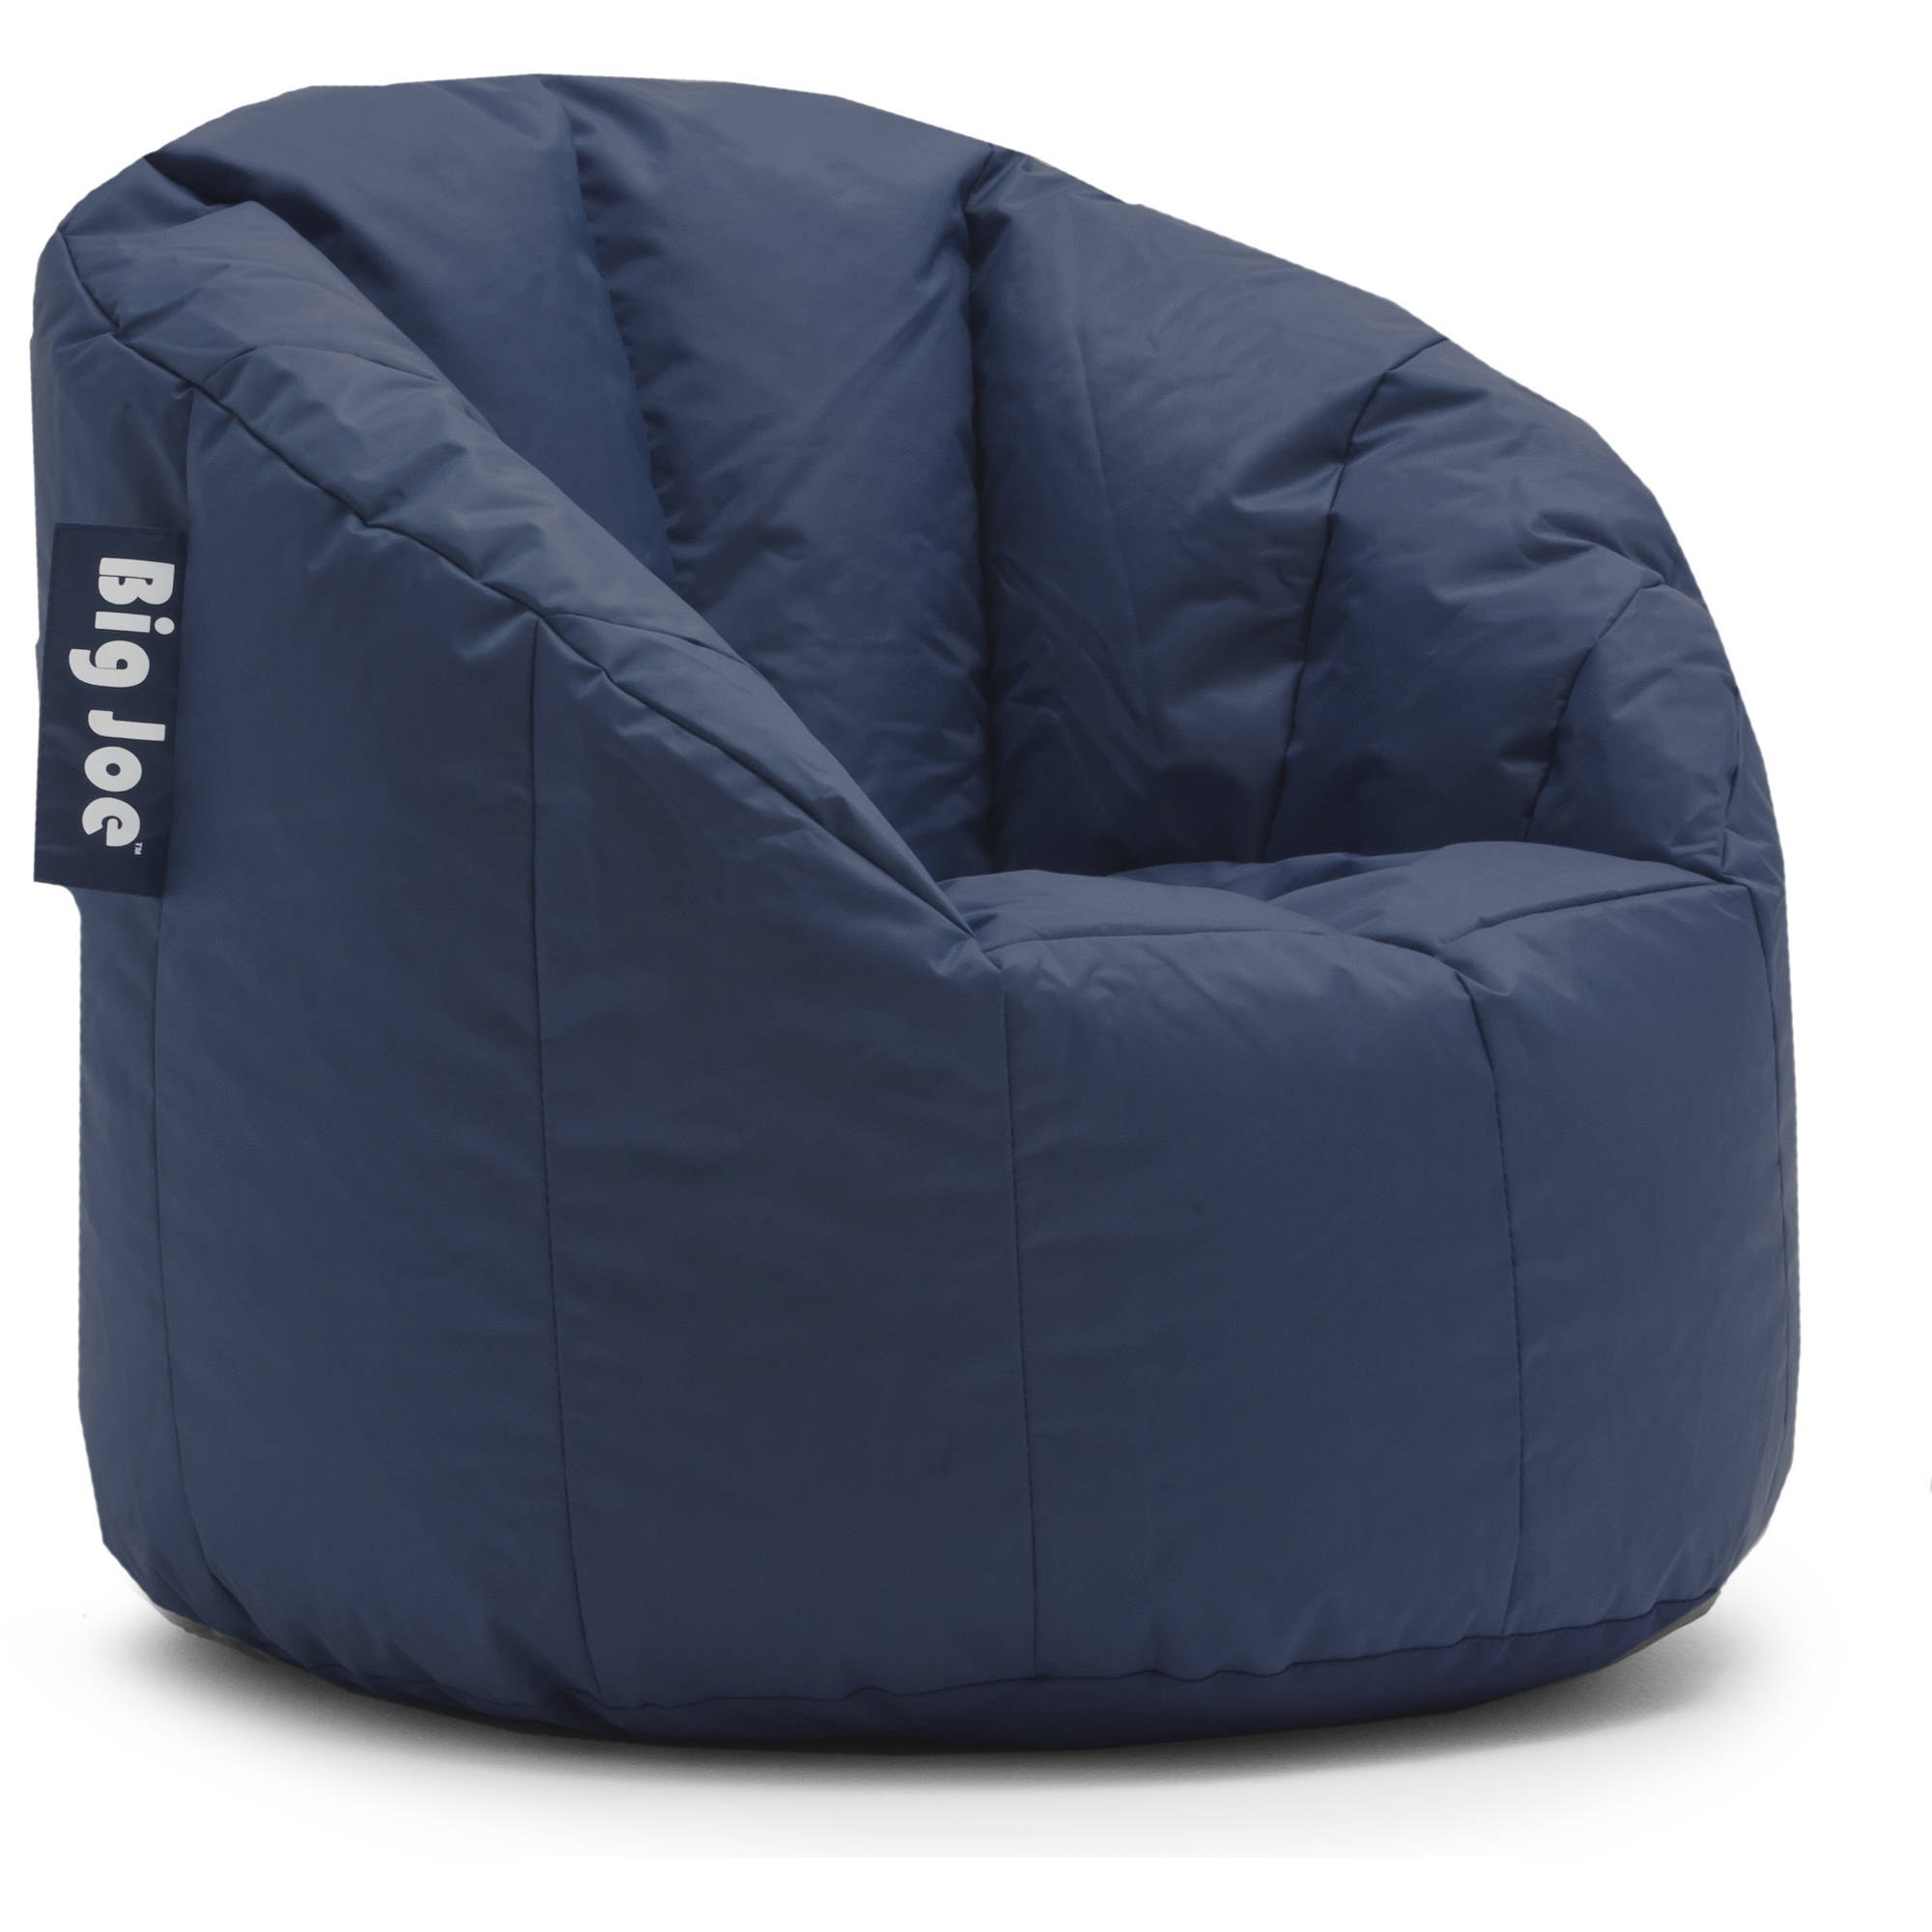 The navy bean bag chair and says &quot;Big Joe&quot;